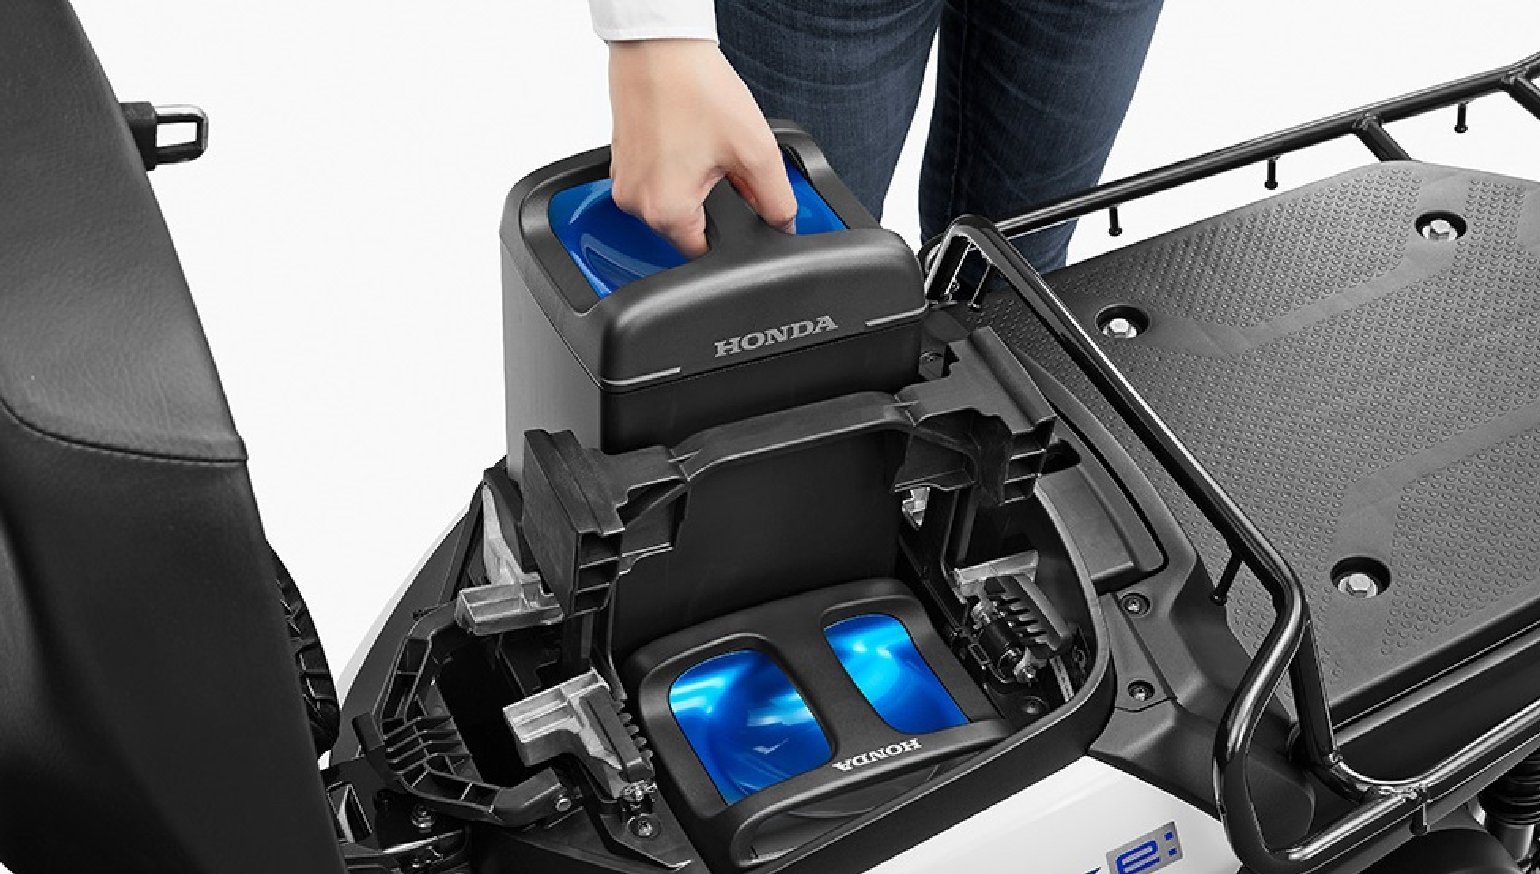 The Gachaco battery swap system, with this one branded as Honda